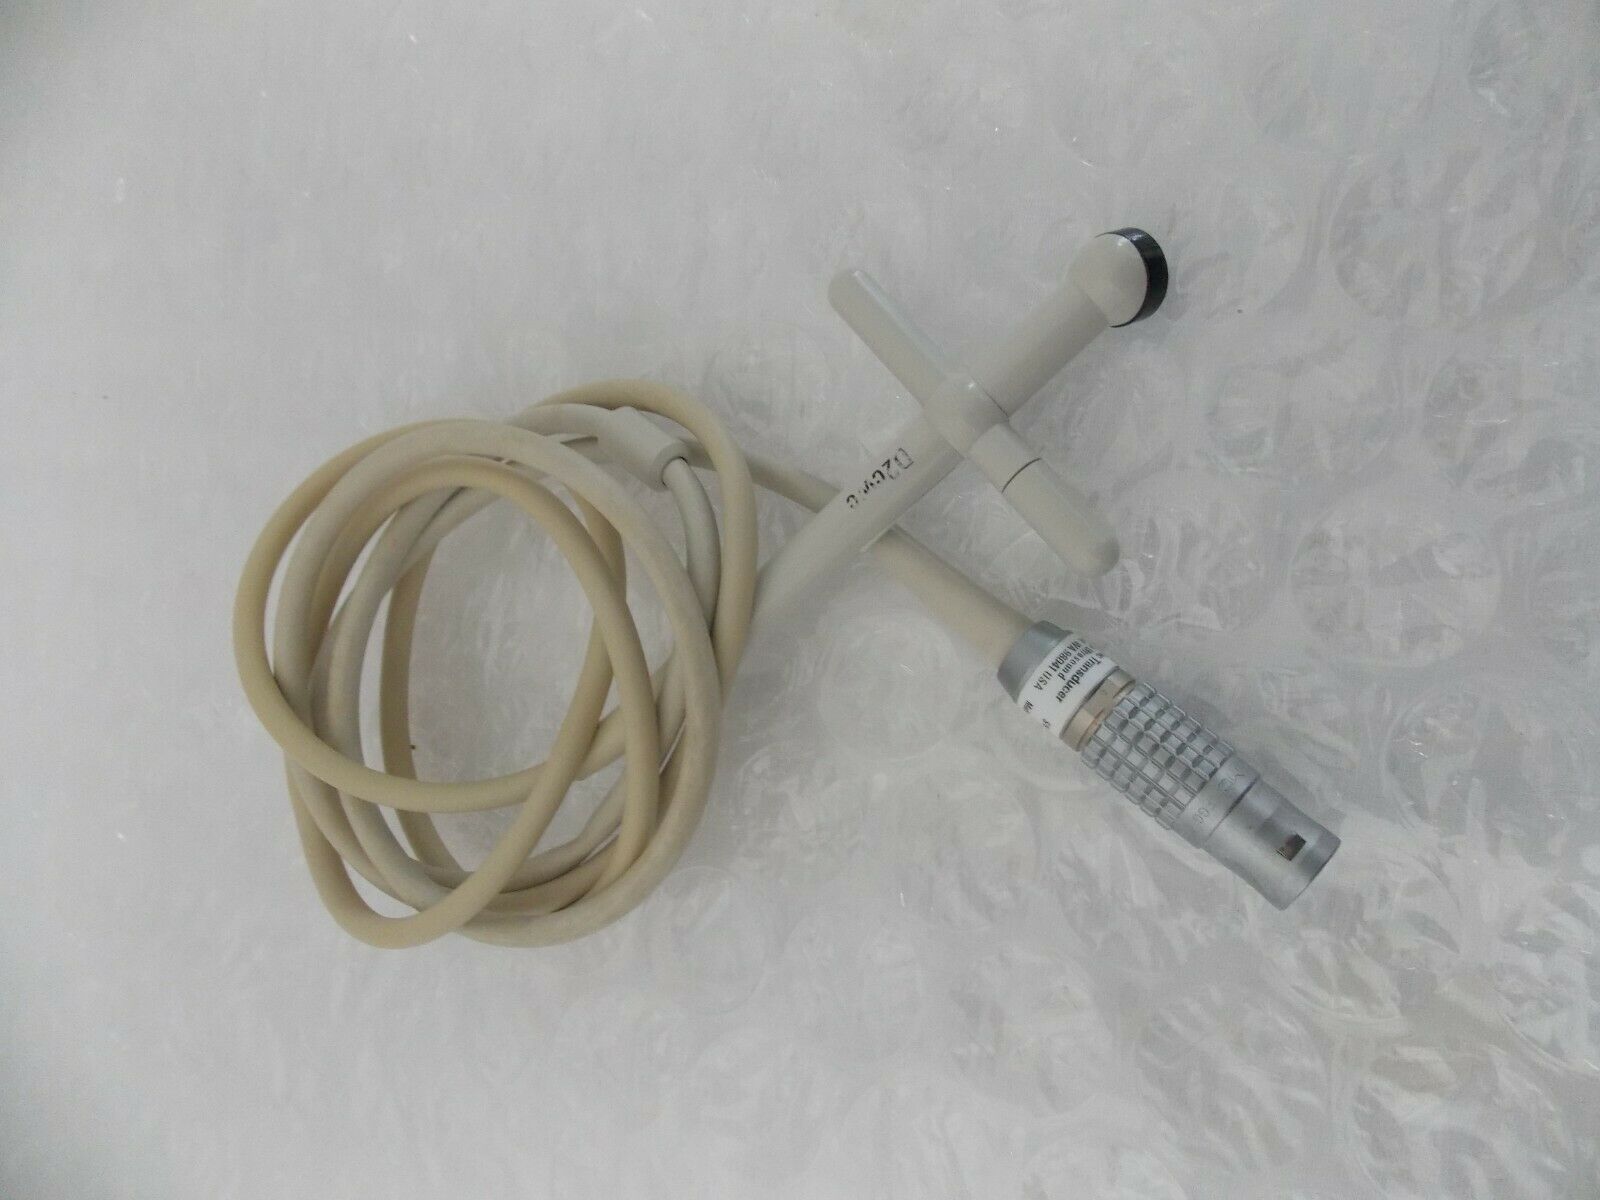 Philips D2cwc Ultrasound Transducer Probe (13) DIAGNOSTIC ULTRASOUND MACHINES FOR SALE